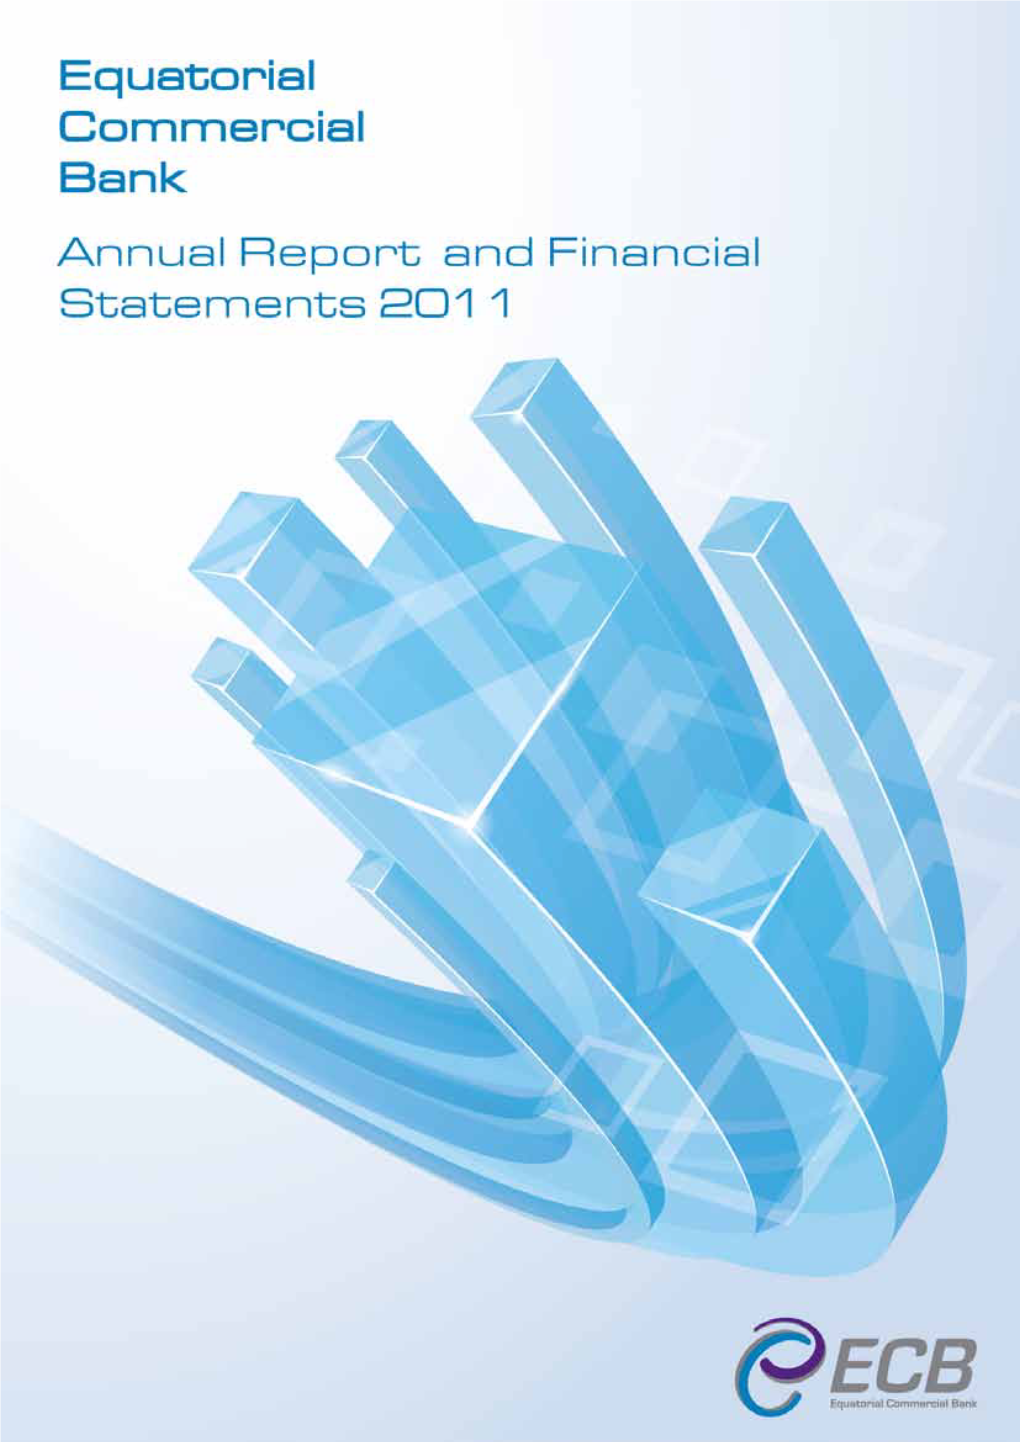 Equatorial Commercial Bank Limited Report and Financial Statements for the Year Ended 31 December 2011